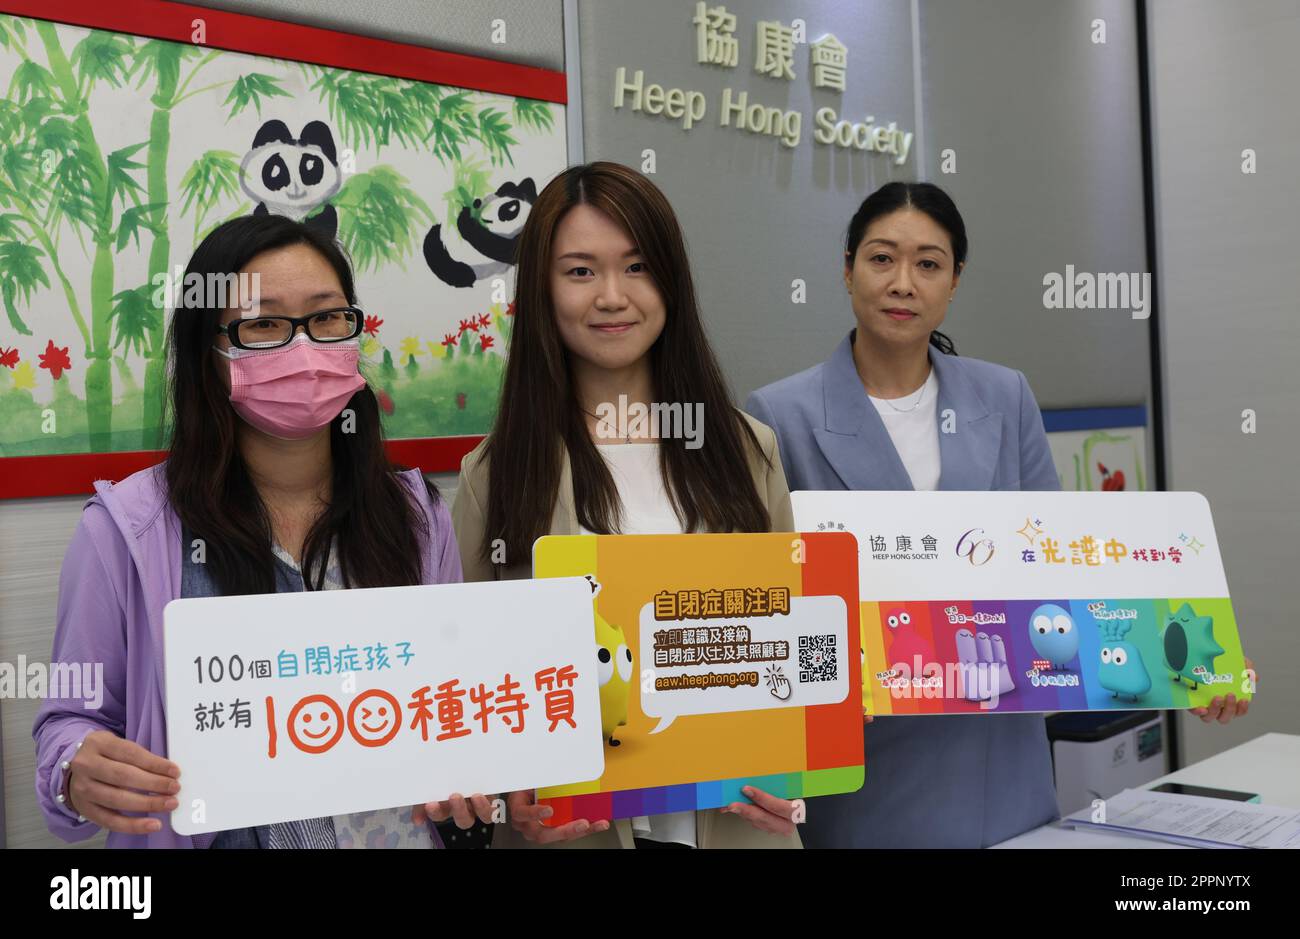 (L-R) Ann Chan, a autistic caregiver;  Gigi Liu Ngai-tsit, Educational Psychologist of Heep Hong Society; and  Carmen Chan Lau-fong, Regional Manager of Heep Hong Society, attend a press conference on survey findings on service needs of caregivers serving the autistic in Kwun Tong.  20APR23  SCMP/Yik Yeung-man Stock Photo